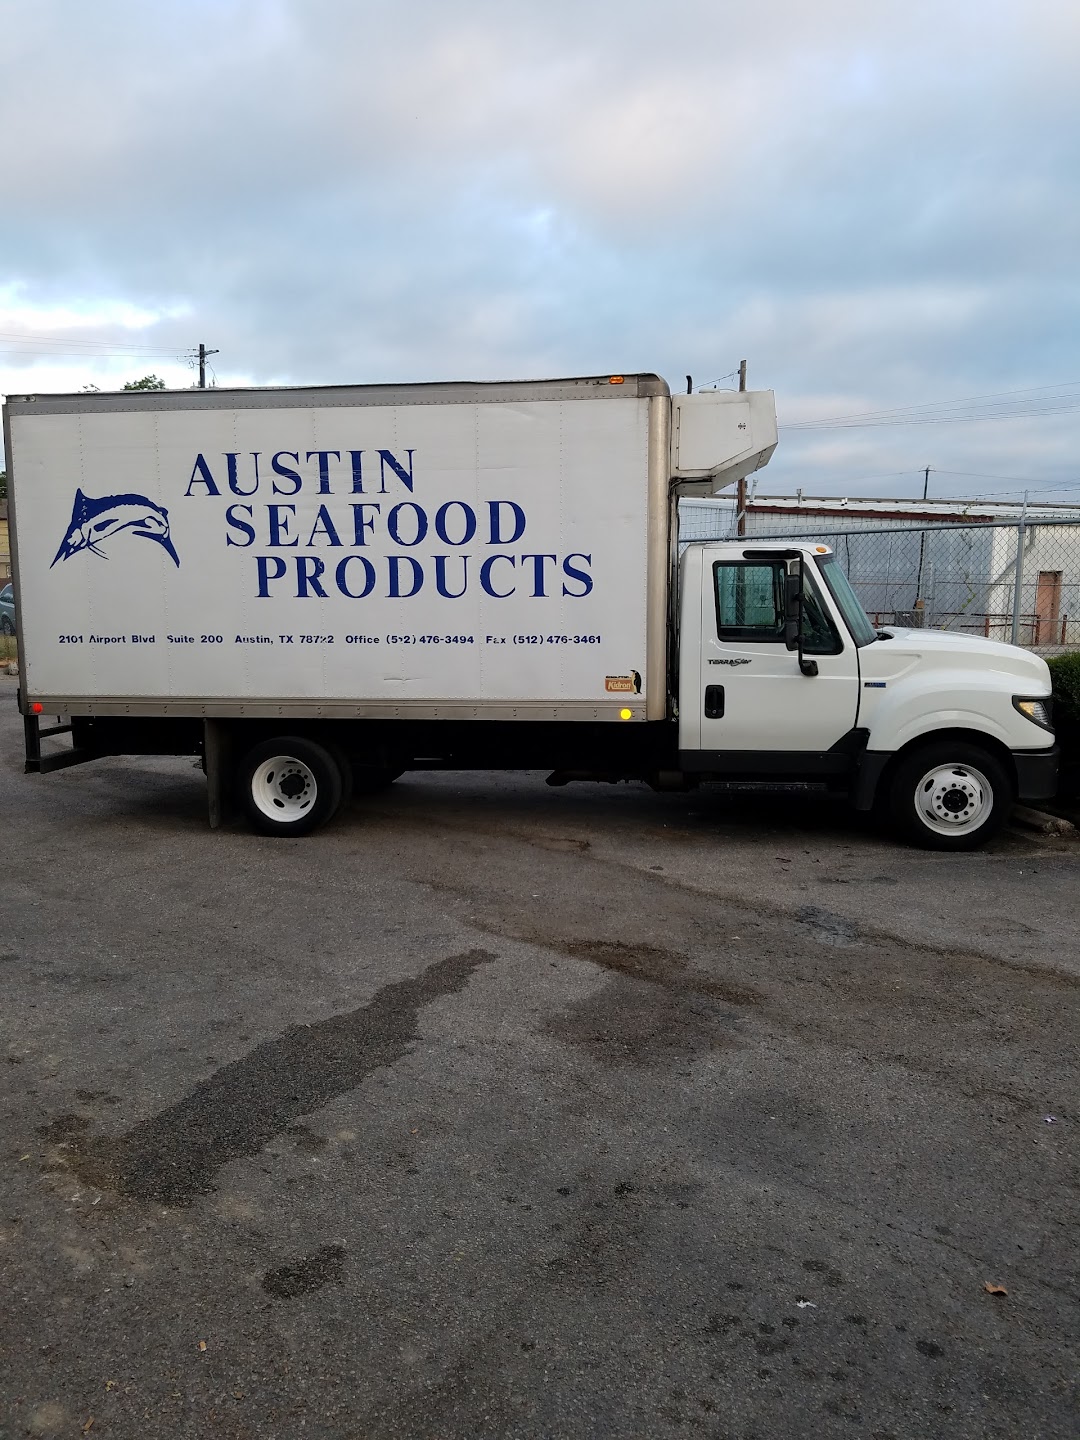 Austin Seafood Products